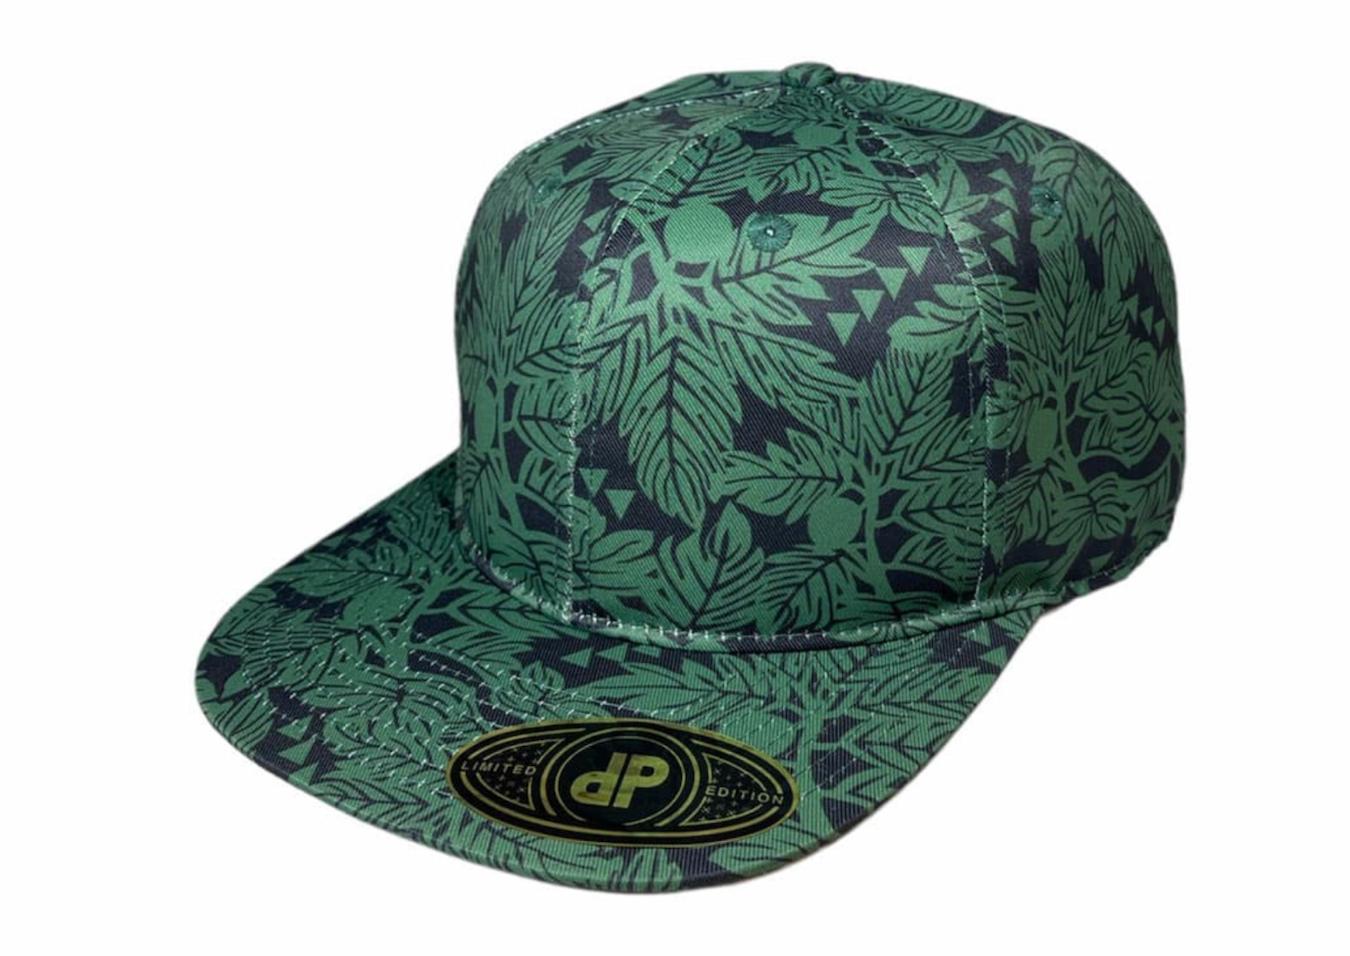 forest ulu snapback hat more hat profile baseball caps affects functional abilities mid profile bucket hats